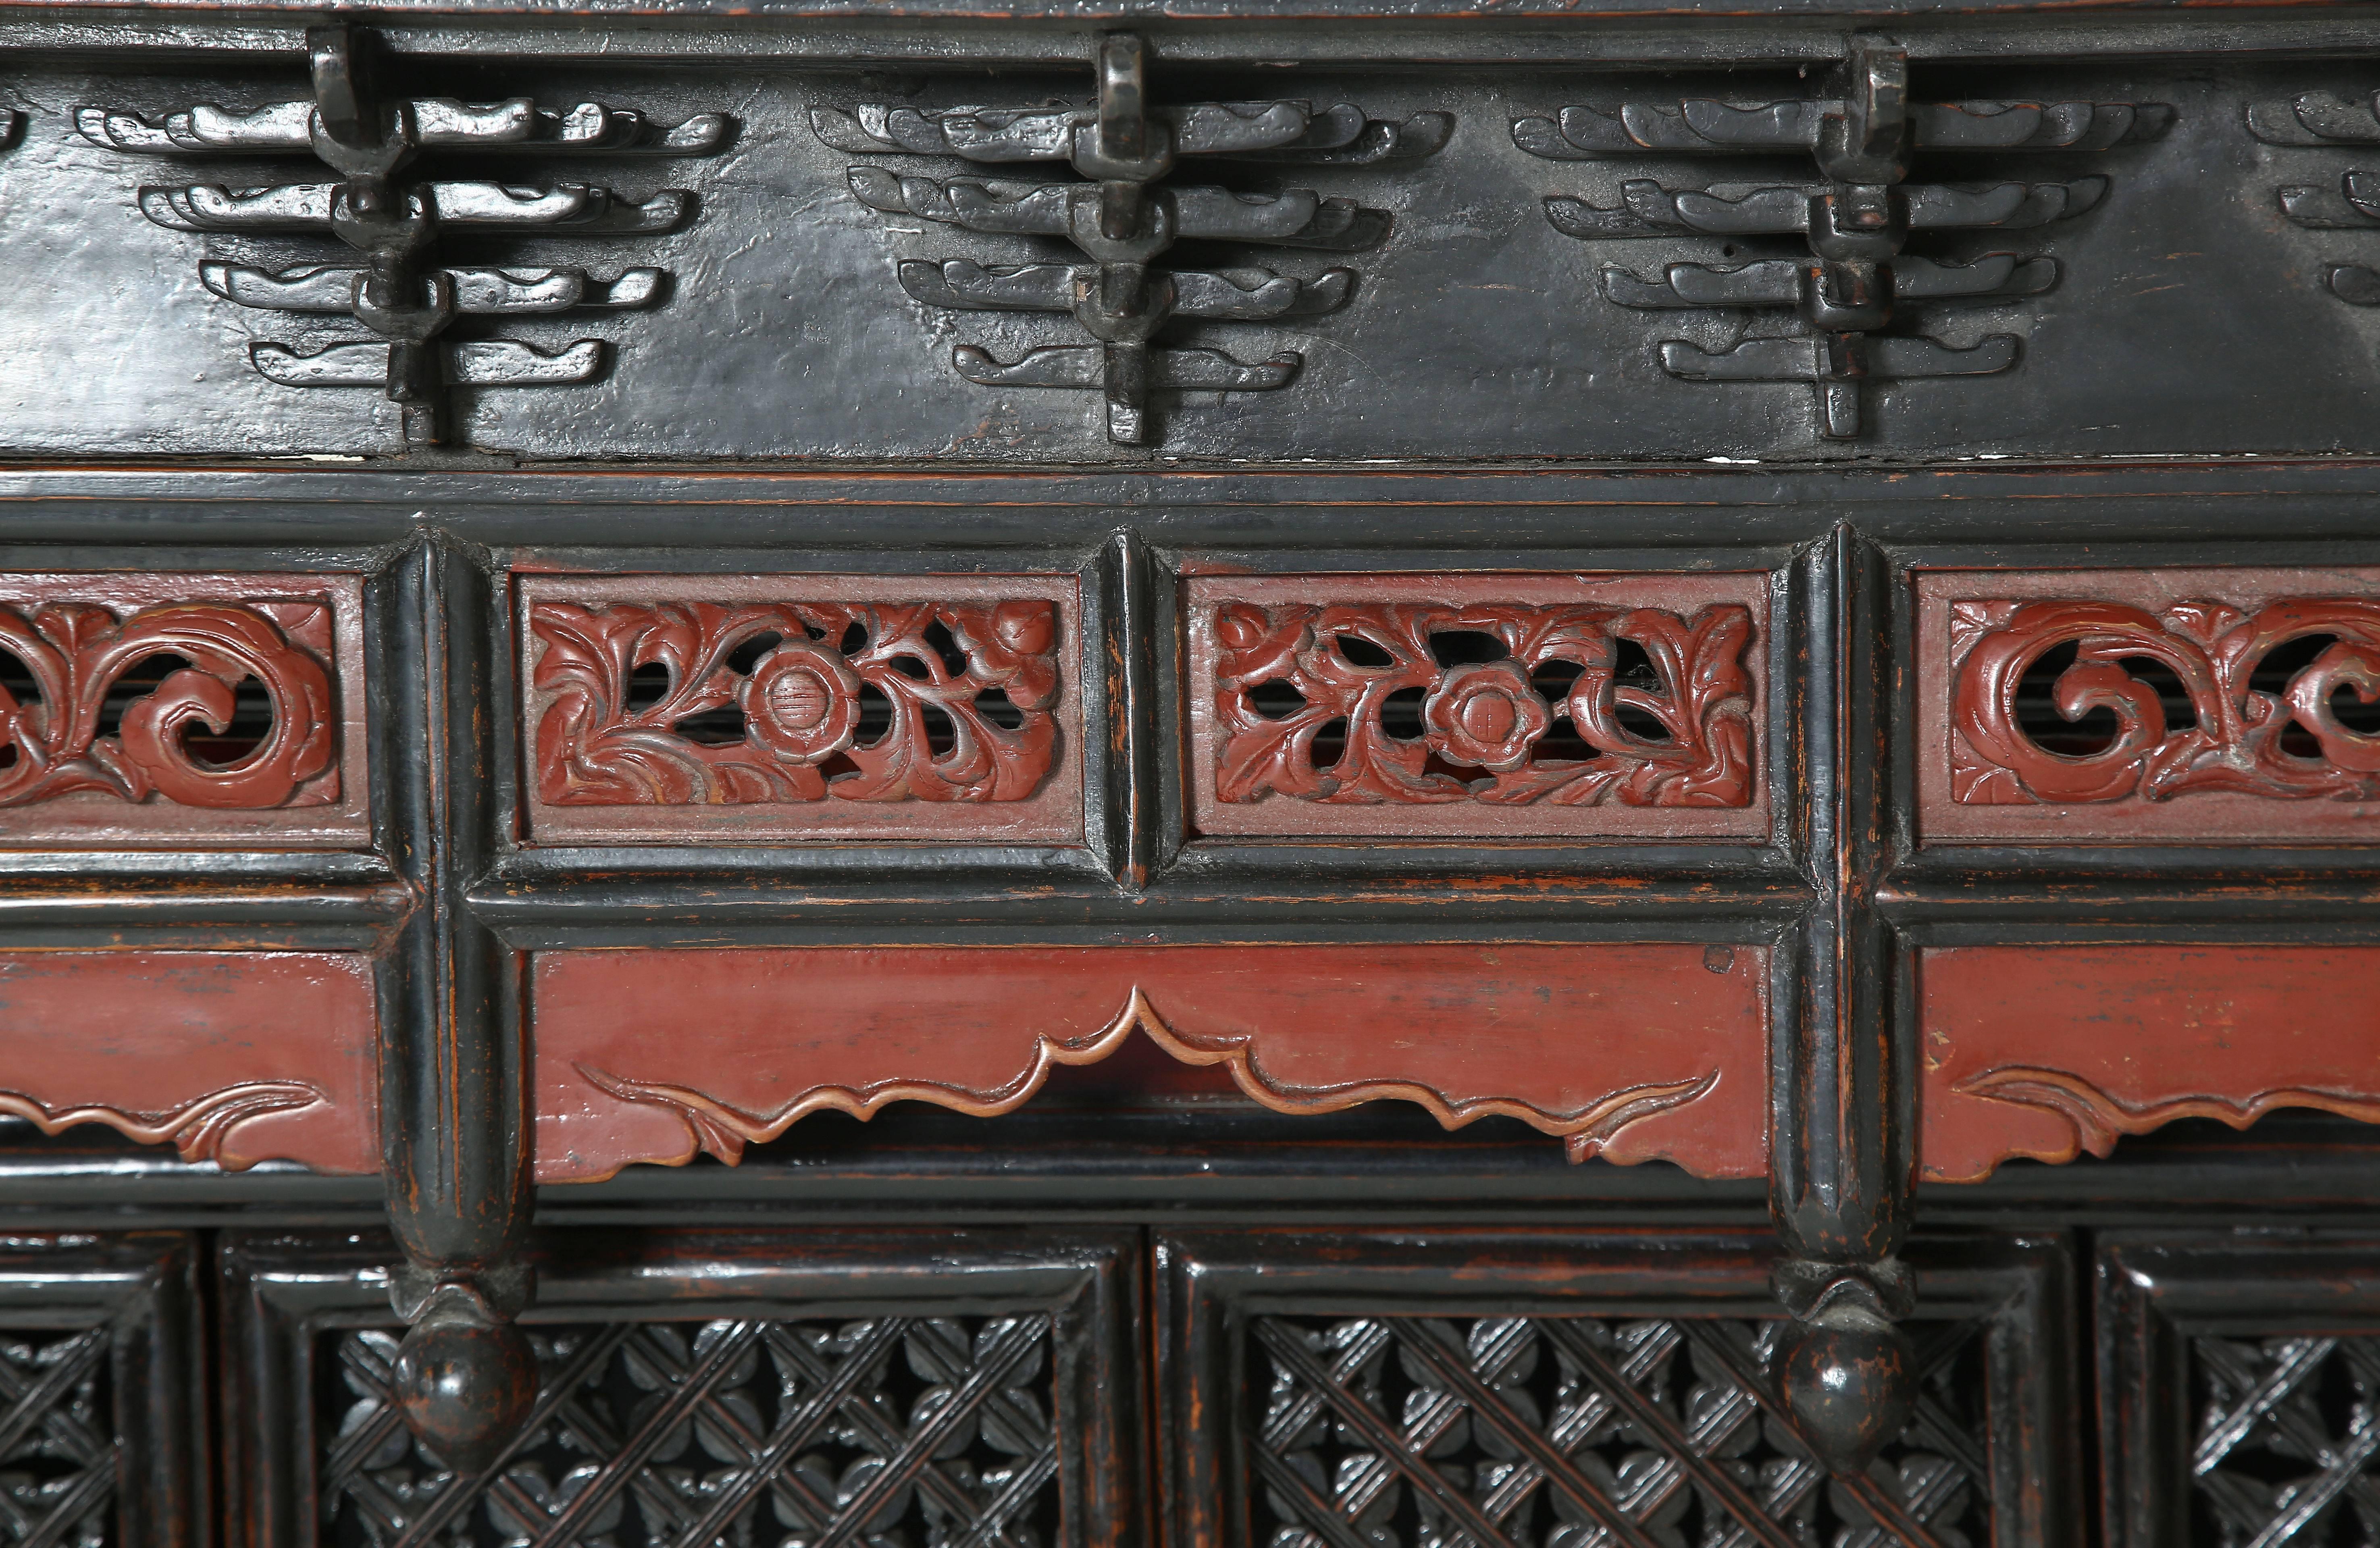 Hand-Crafted Antique Black/Red Lacquer Table Shrine Cabinet Carved Lattice Doors Chinoiserie